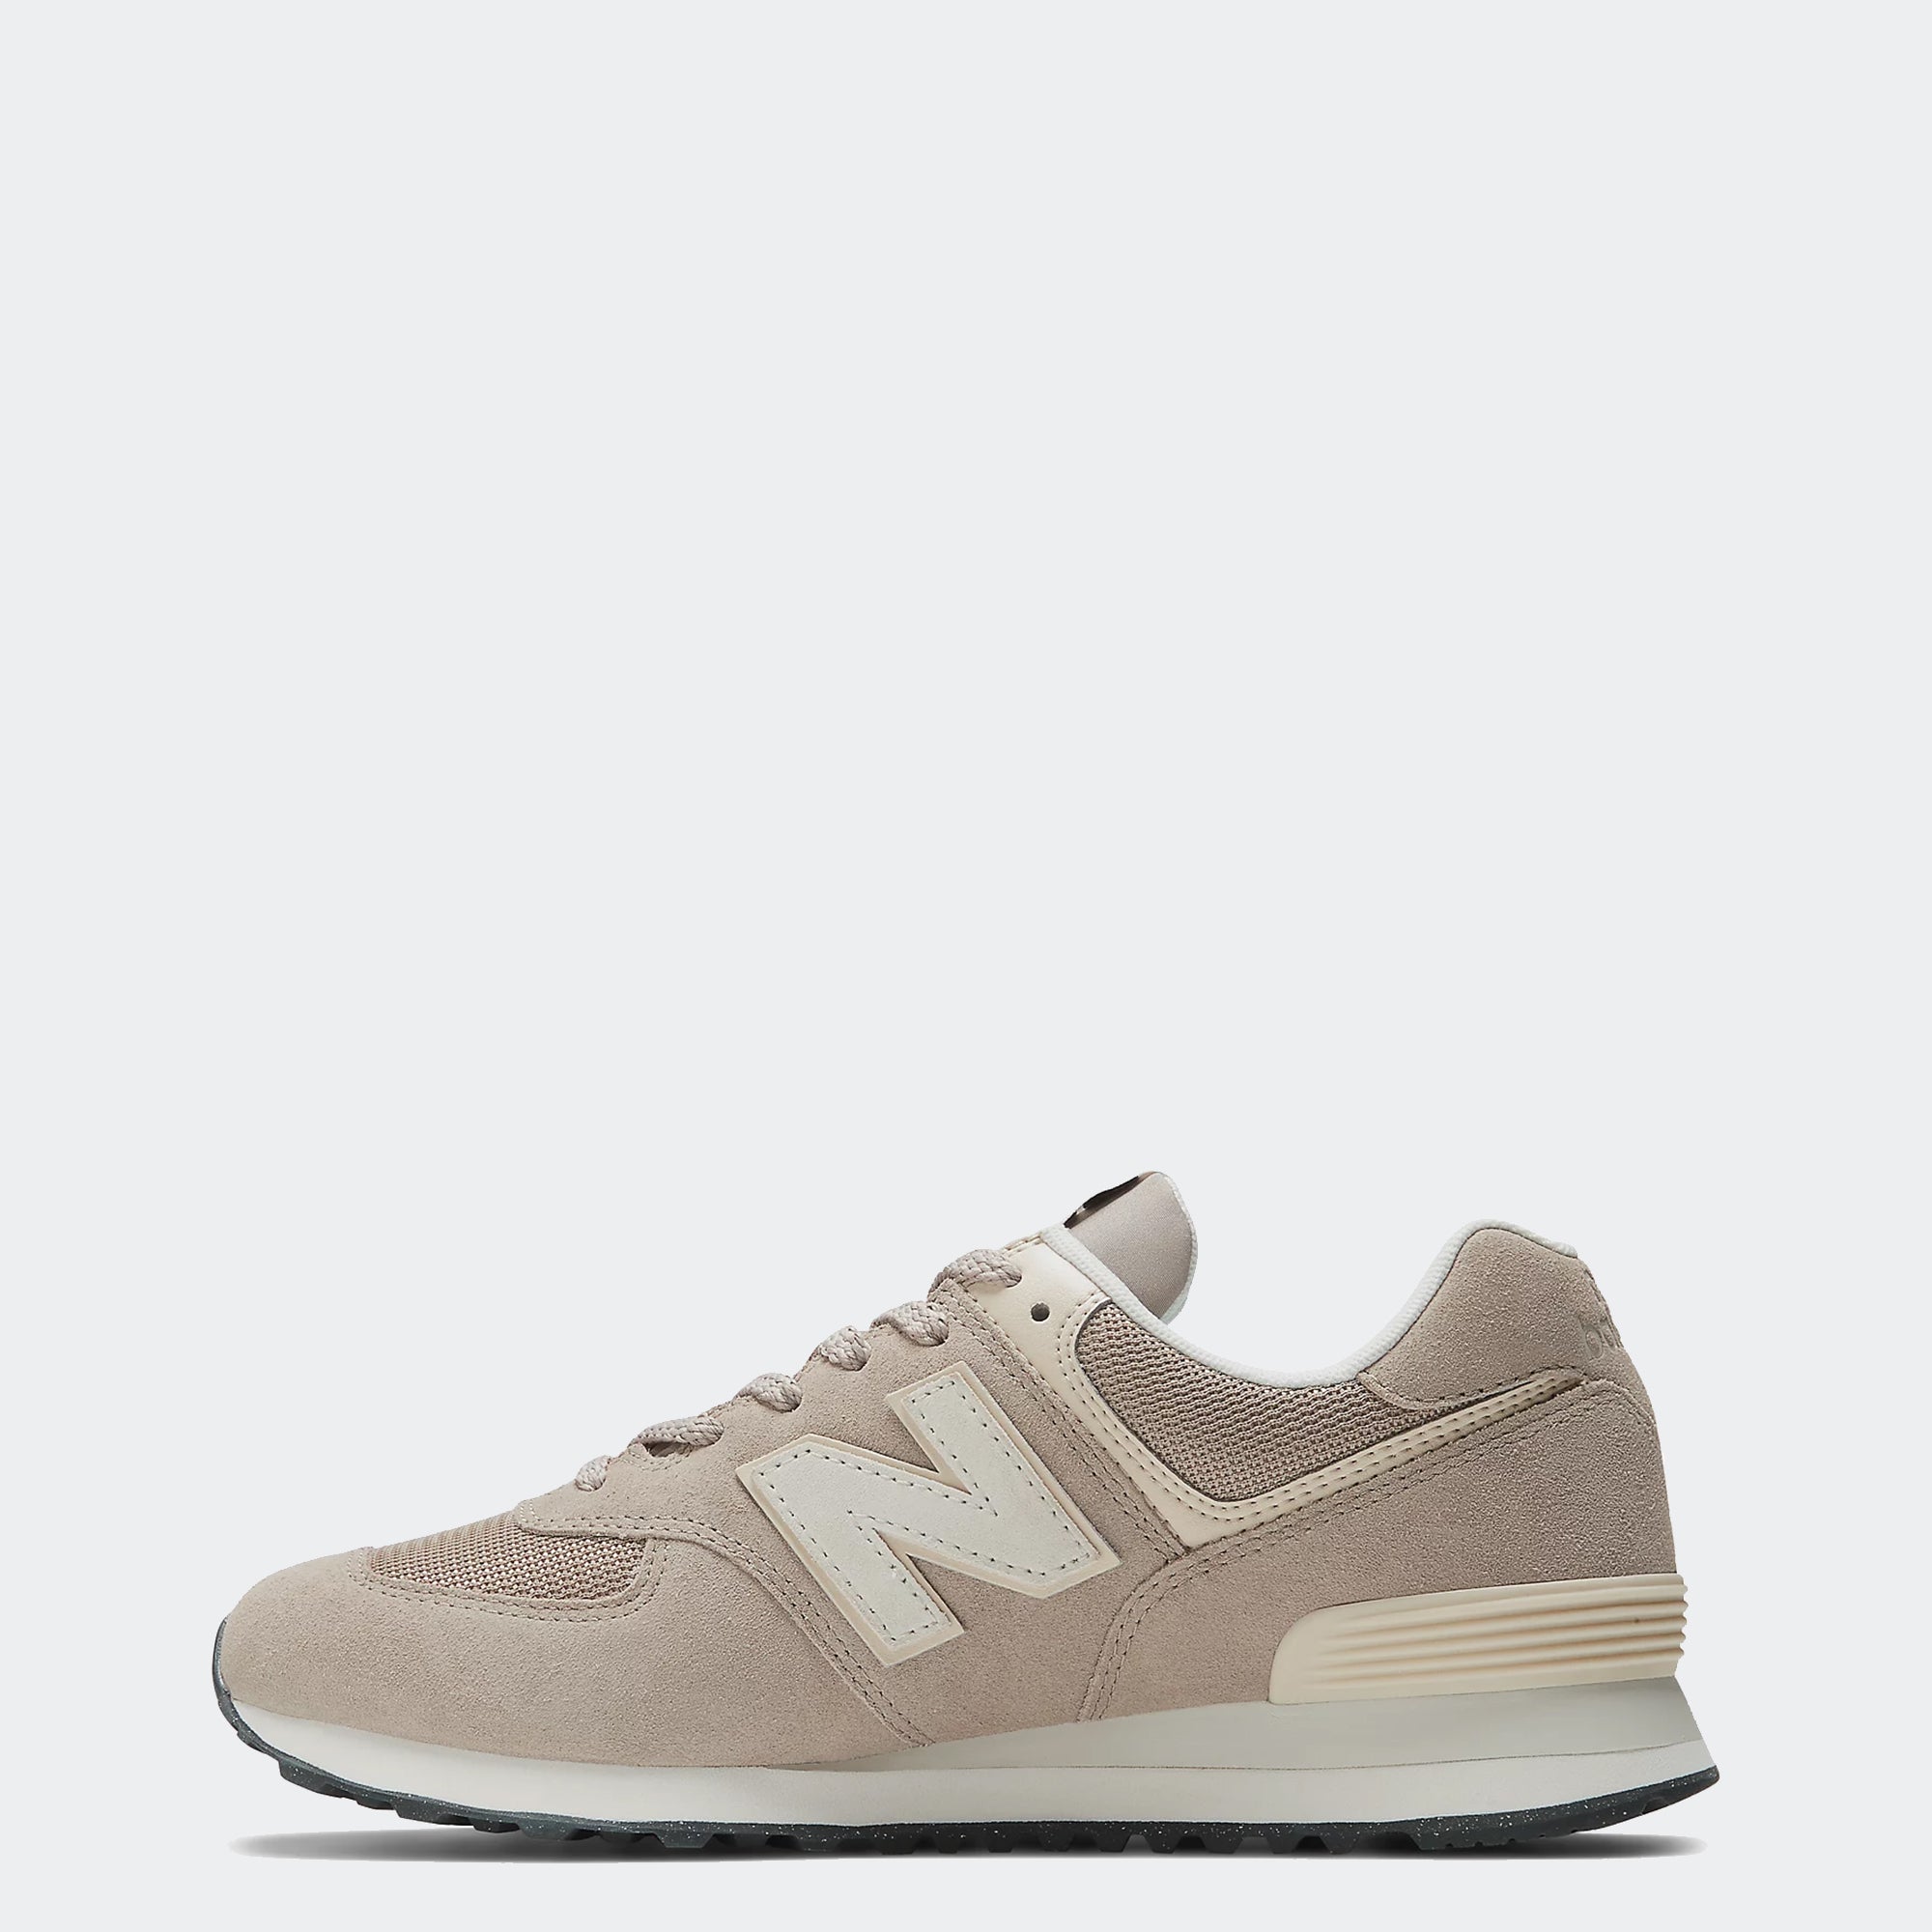 New Balance 574 Shoes Beige / Off White Chicago City